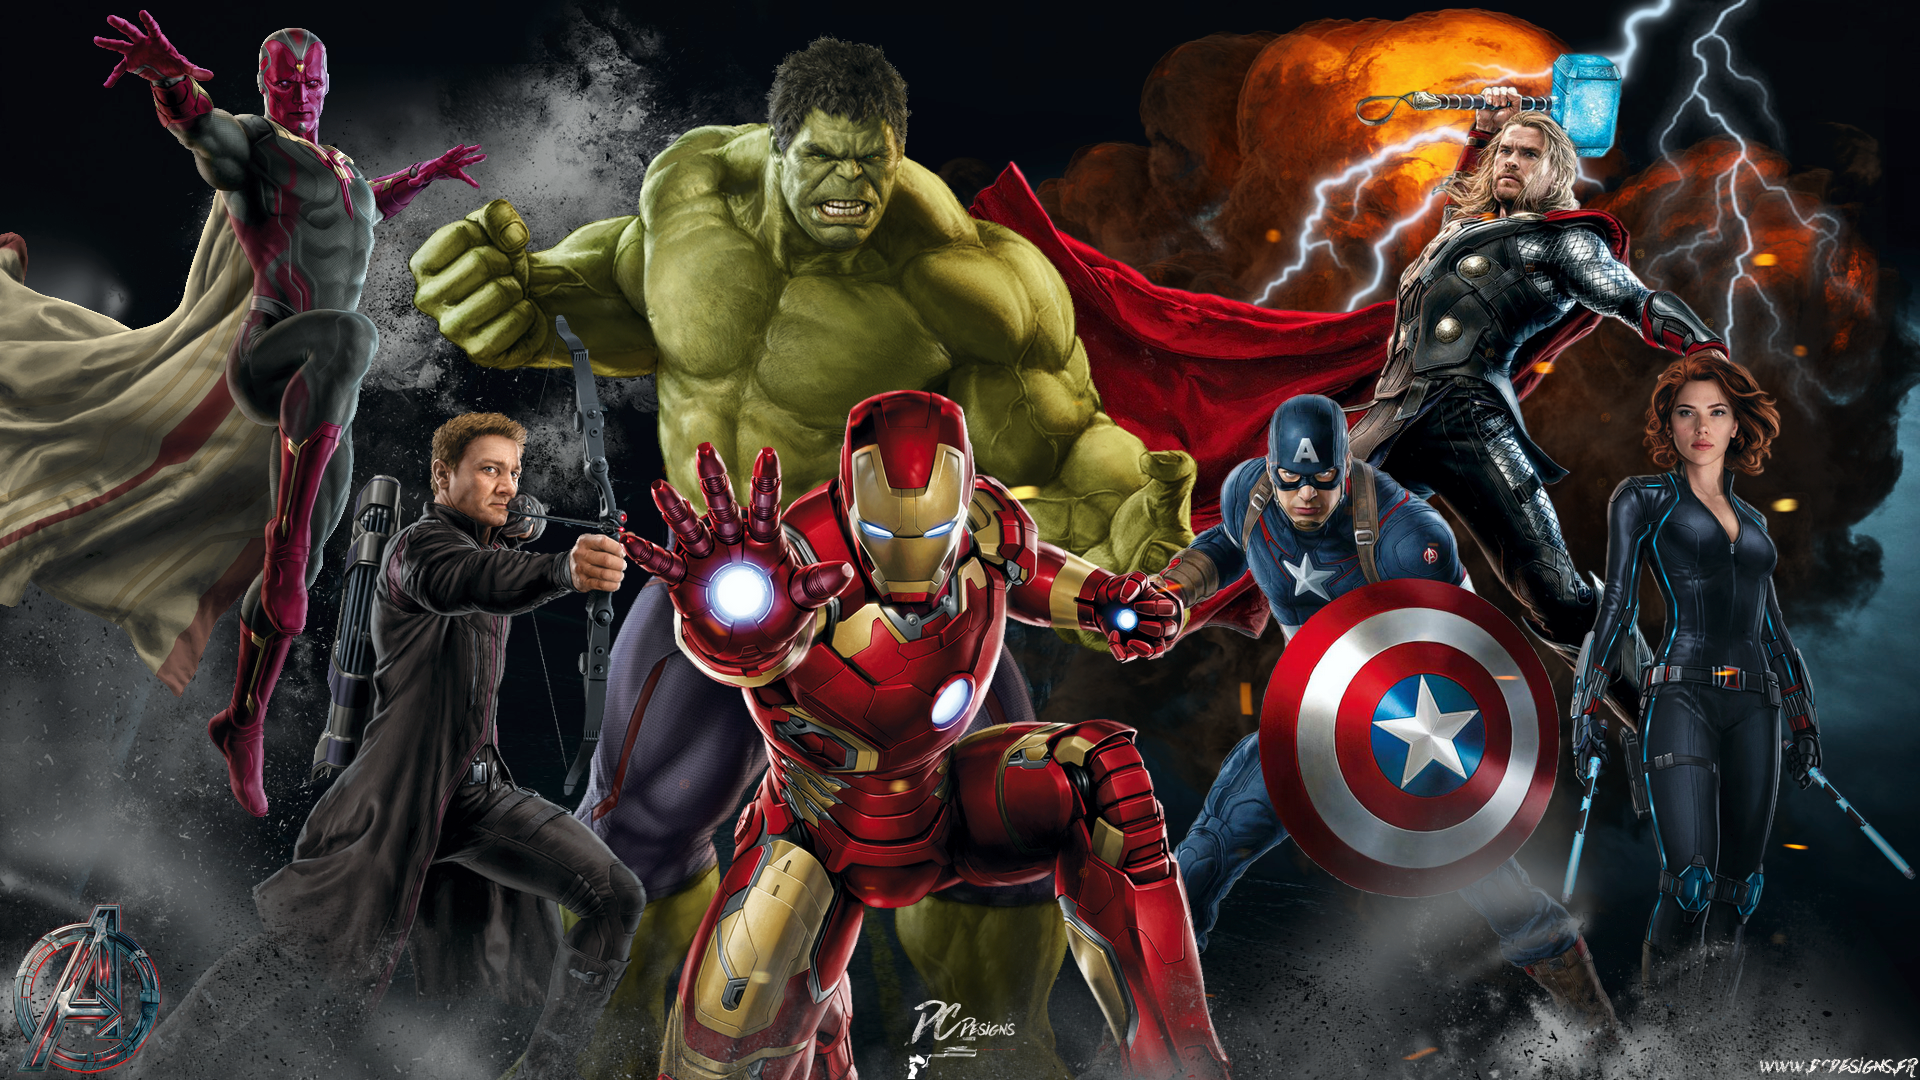  Age Of Ultron some best HD Wallpapers 2015   All HD Wallpapers